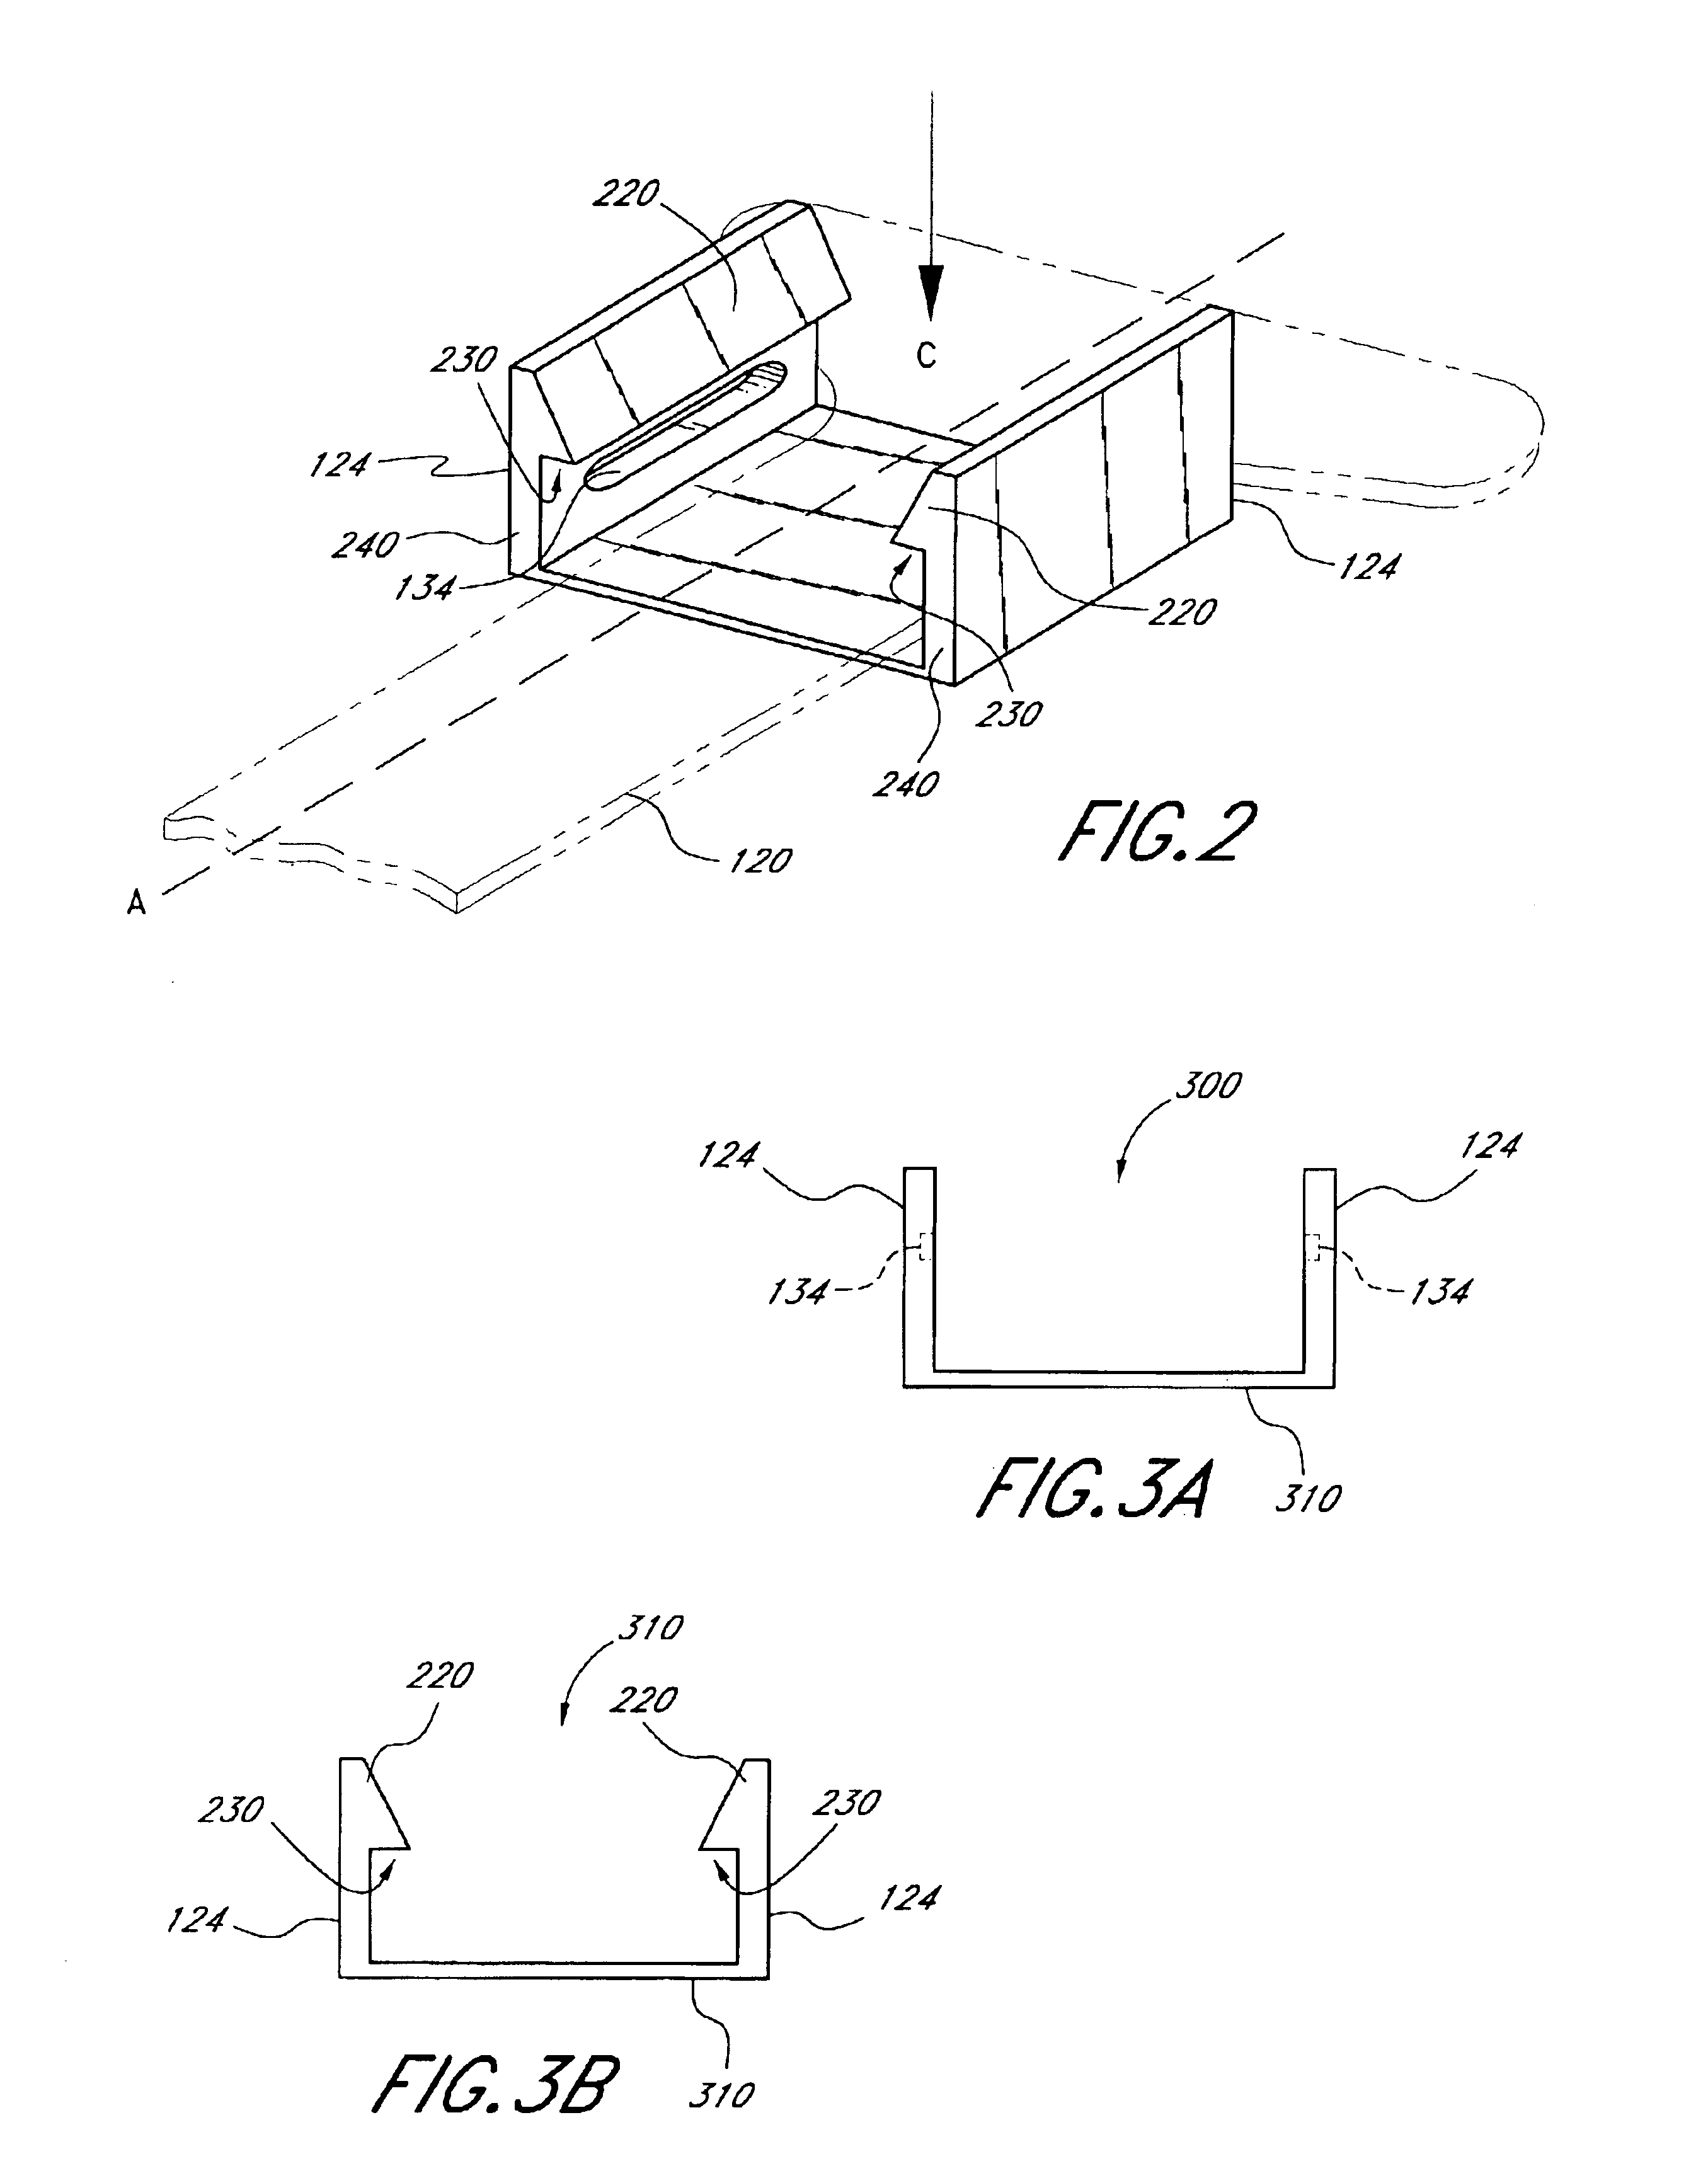 Optical sensor including disposable and reusable elements